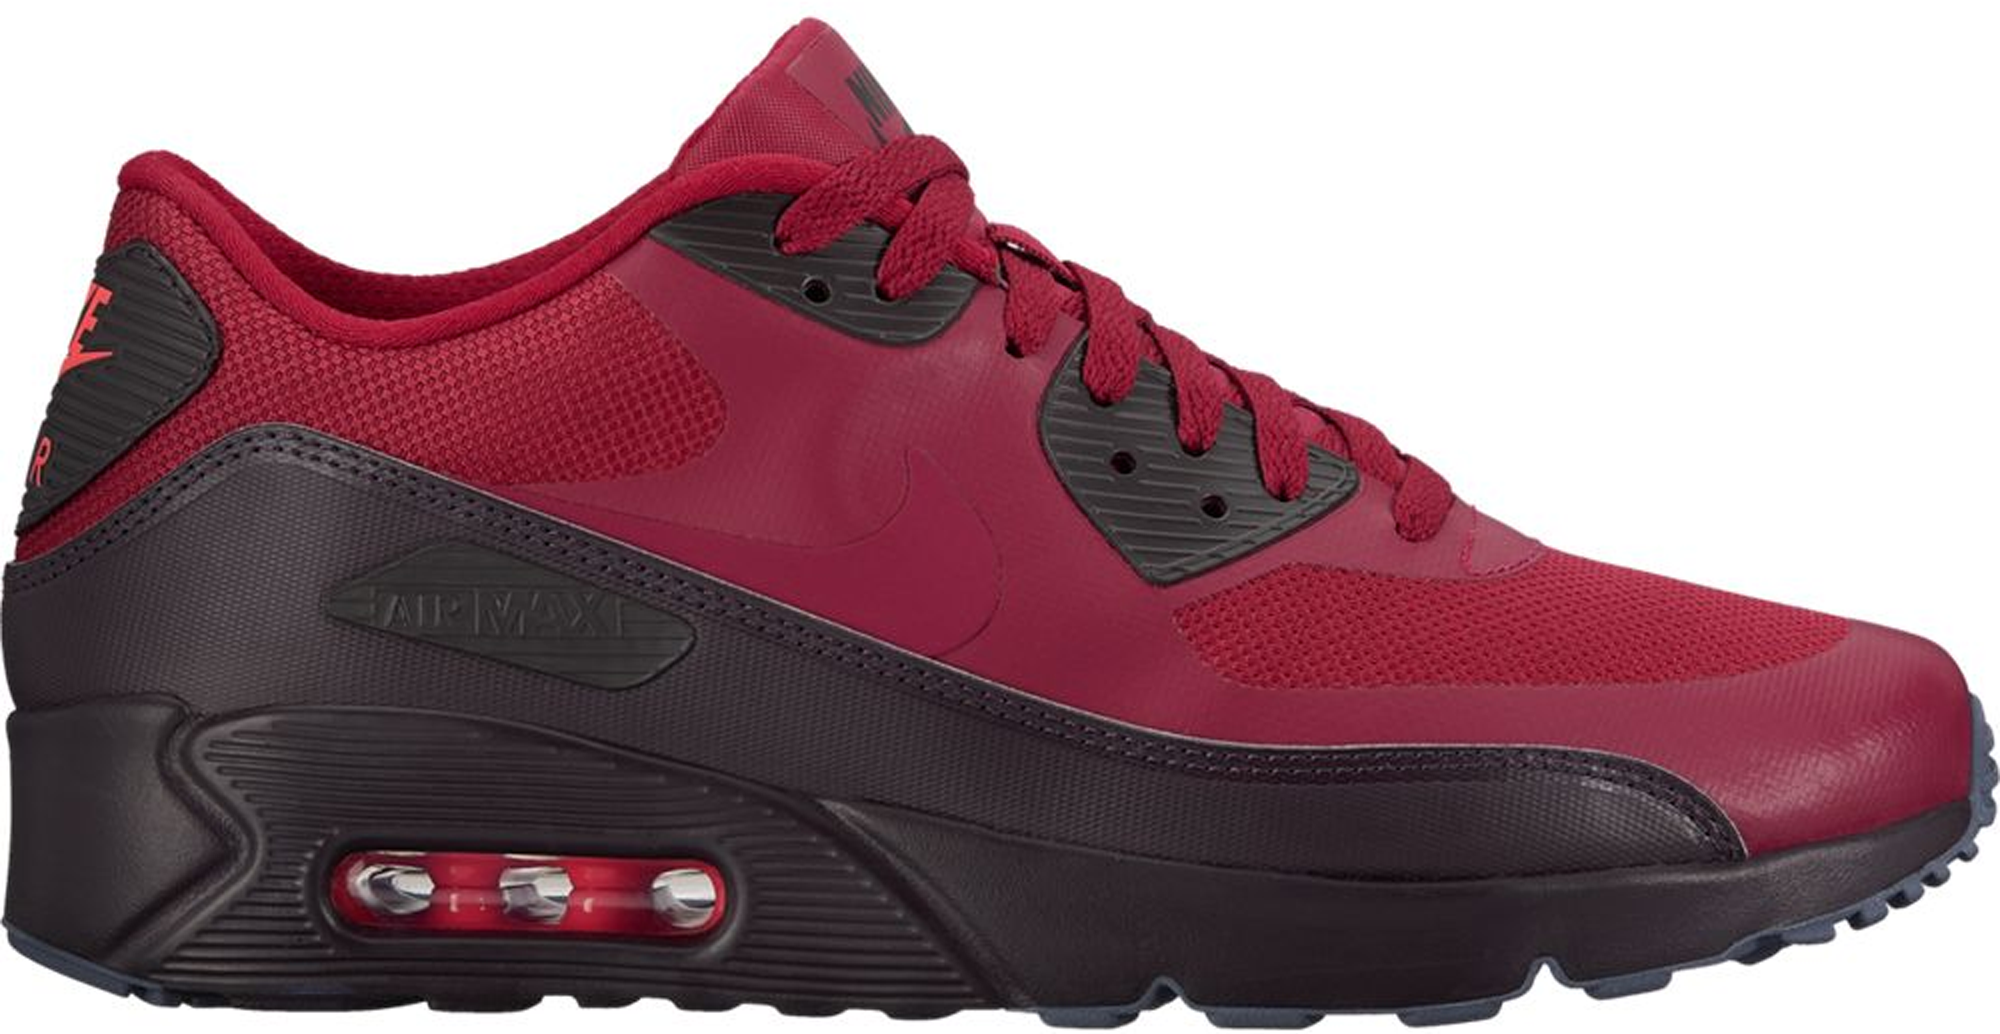 nike air max 90 ultra red and white